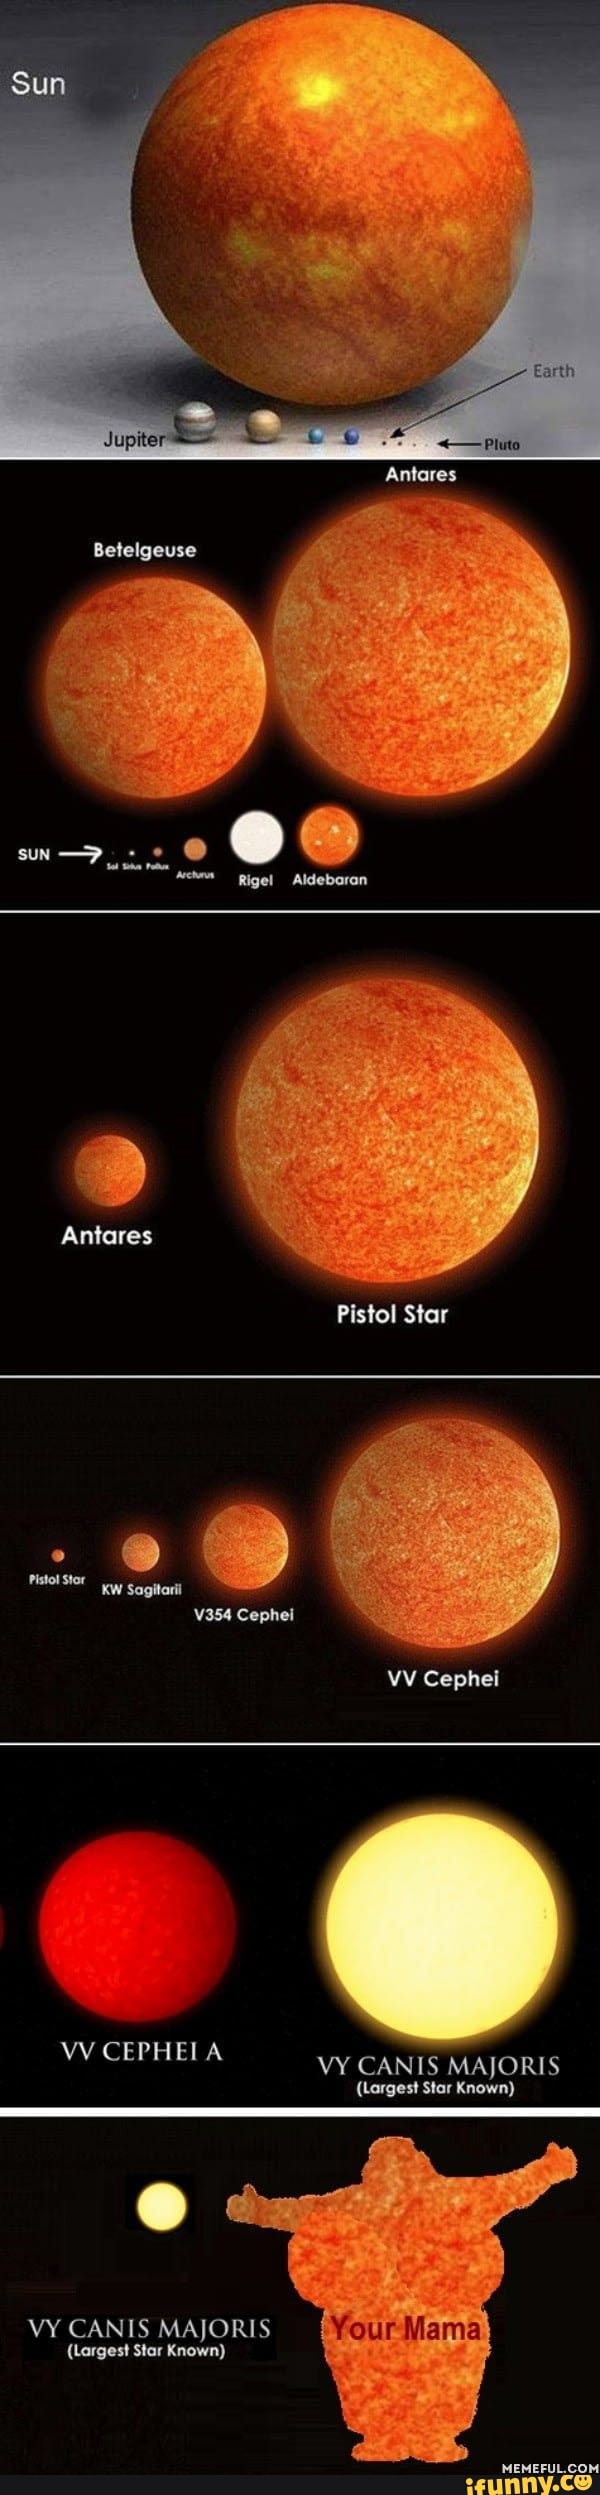 vy canis majoris from earth